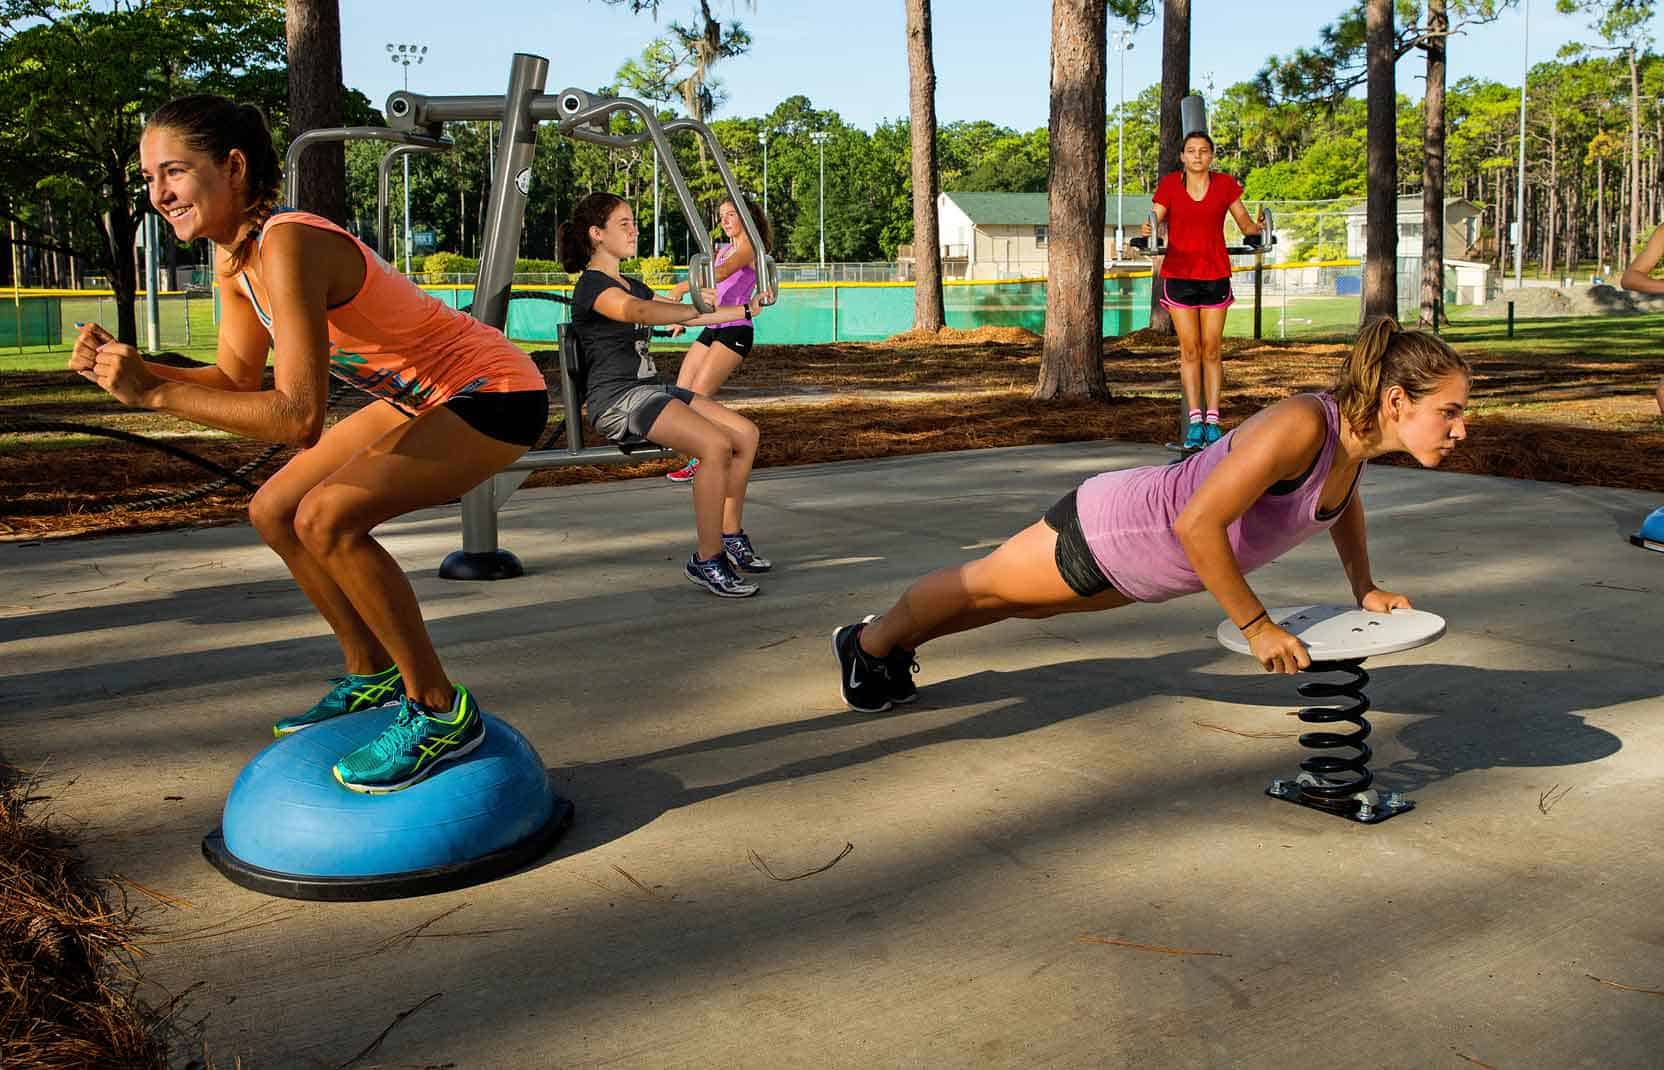 Bring the Gym Outside With These Easy Outdoor Workouts